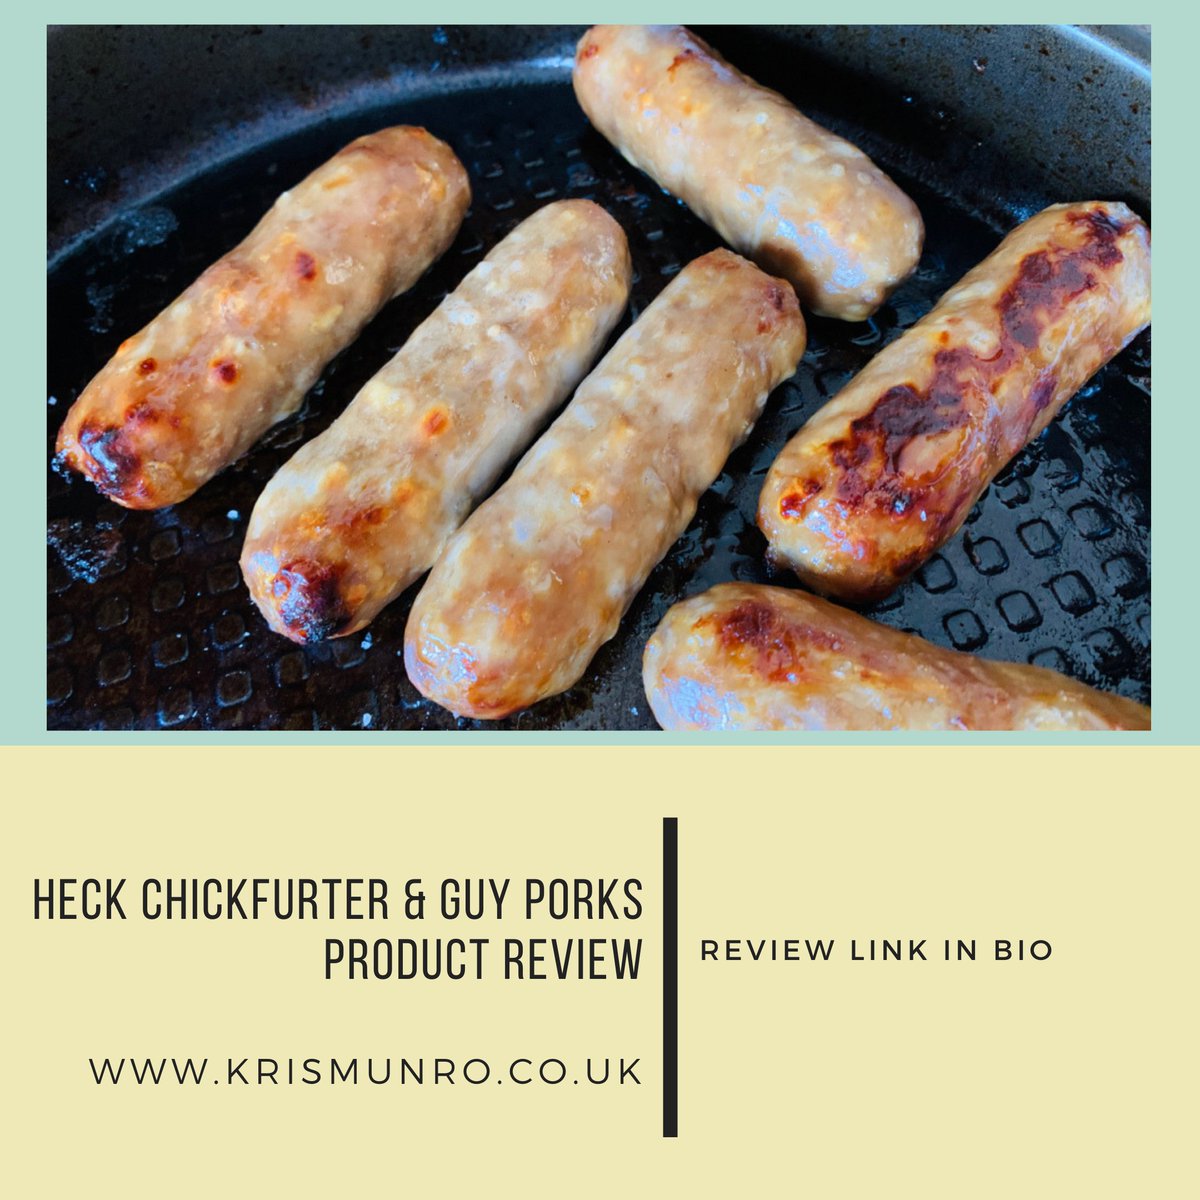 NEW #Food #Product #Blog #Review :

HECK CHICKFURTER & GUY PORKS: PRODUCT REVIEW

bit.ly/2MXWKUt

@HeckFood @BloggersGang @BloggersLoveRT @BloggerHQ @Influencer_RT @FierceBloggers @UKBlogRT @UKBloggersRT @BloggersHut @TheBloggersPost